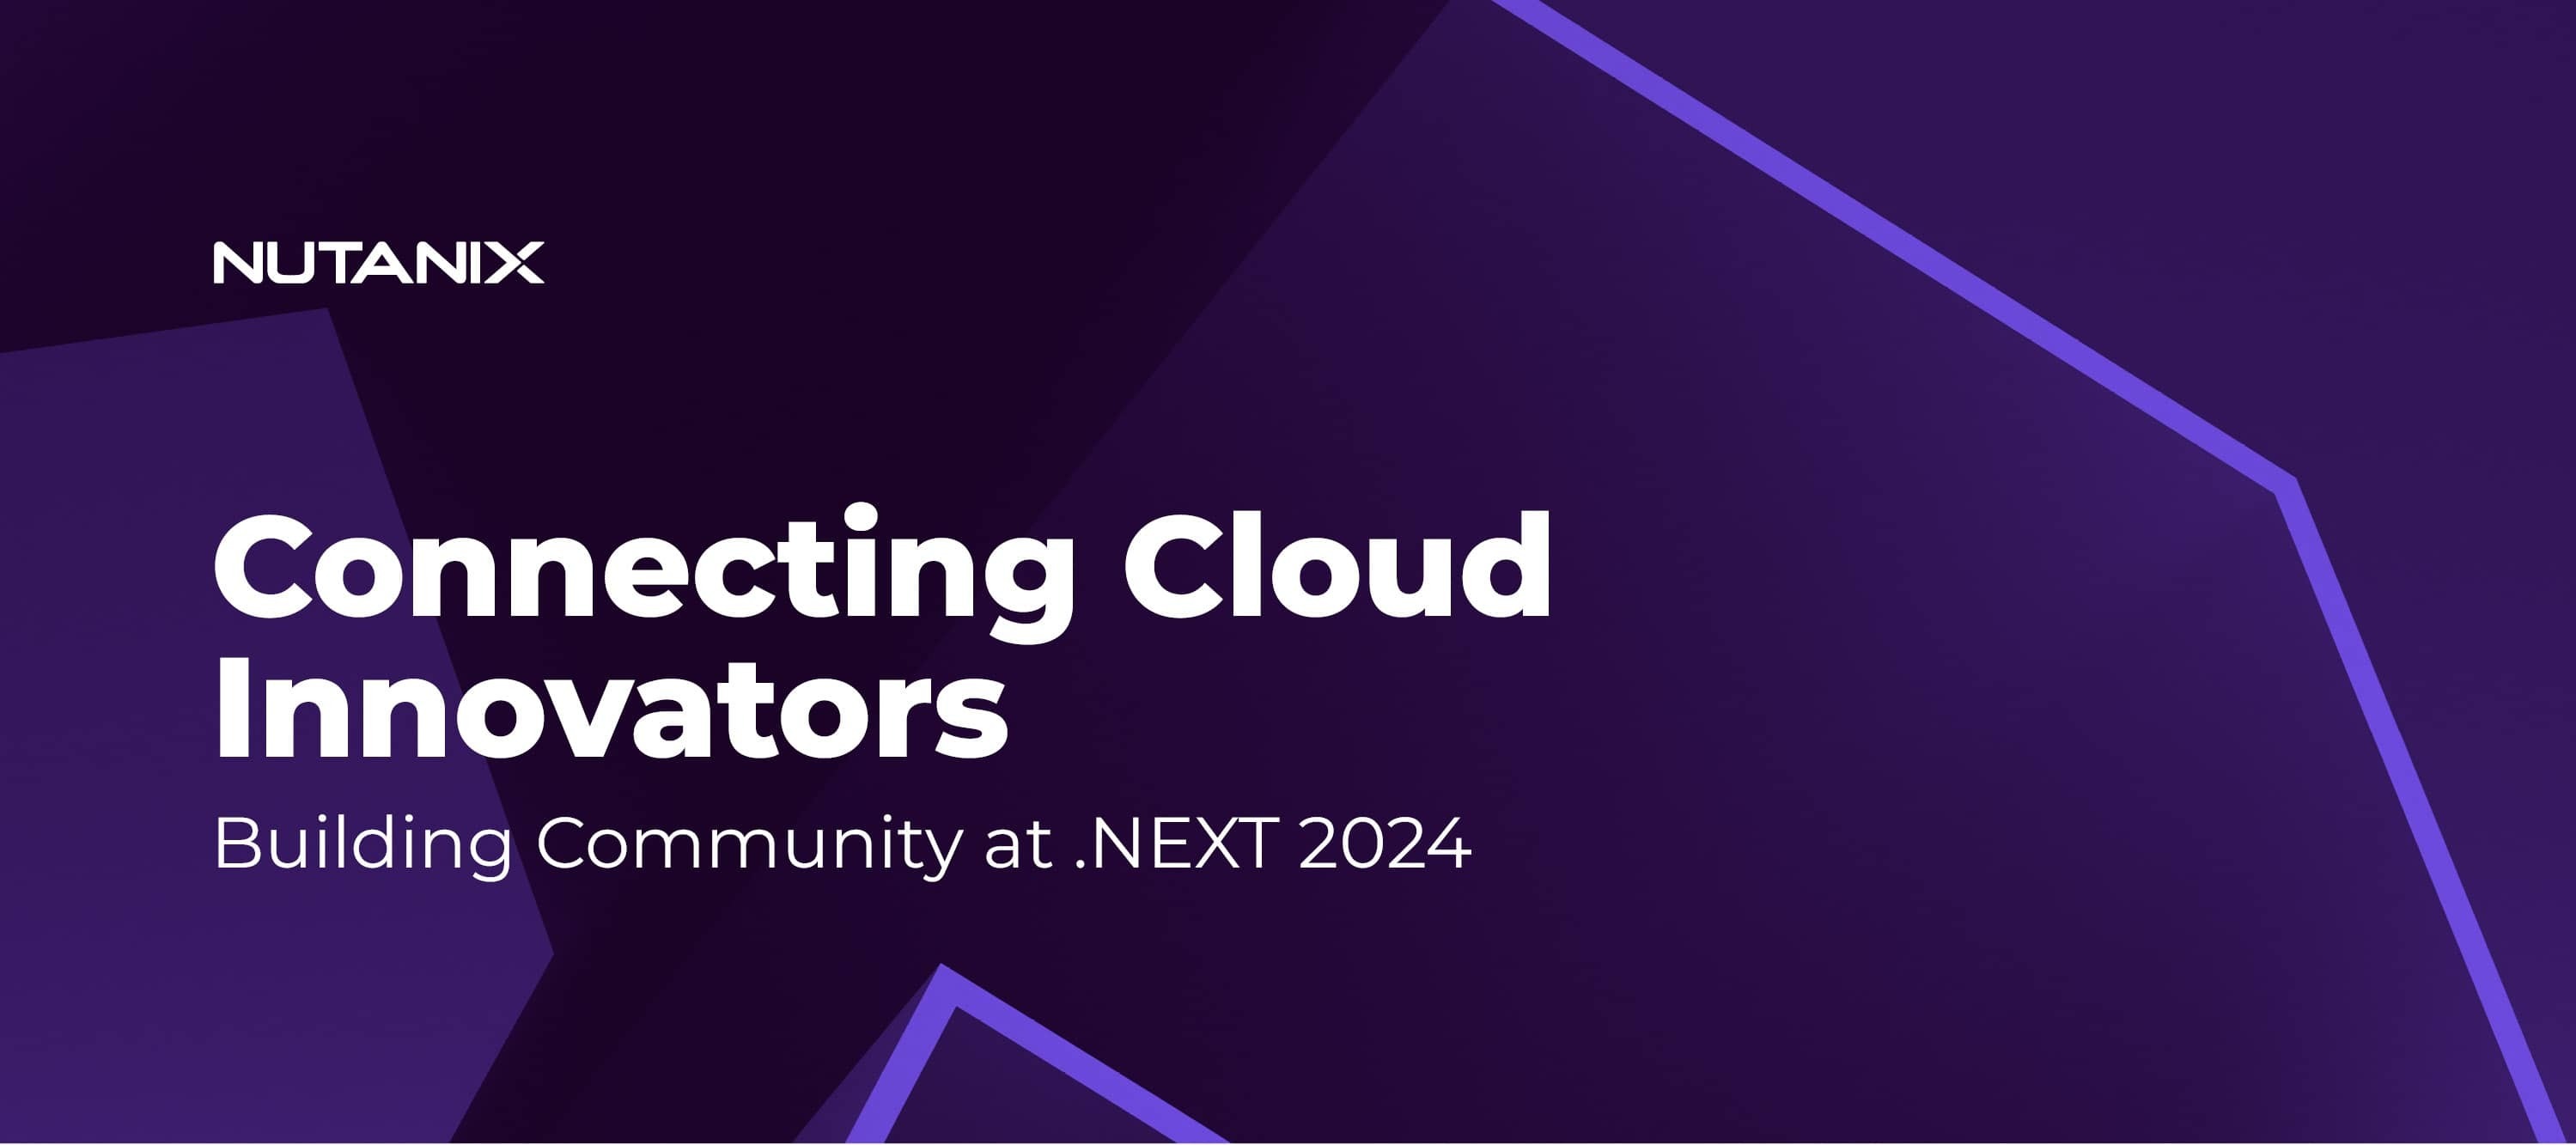 Connecting Cloud Innovators: Building Community at .NEXT 2024